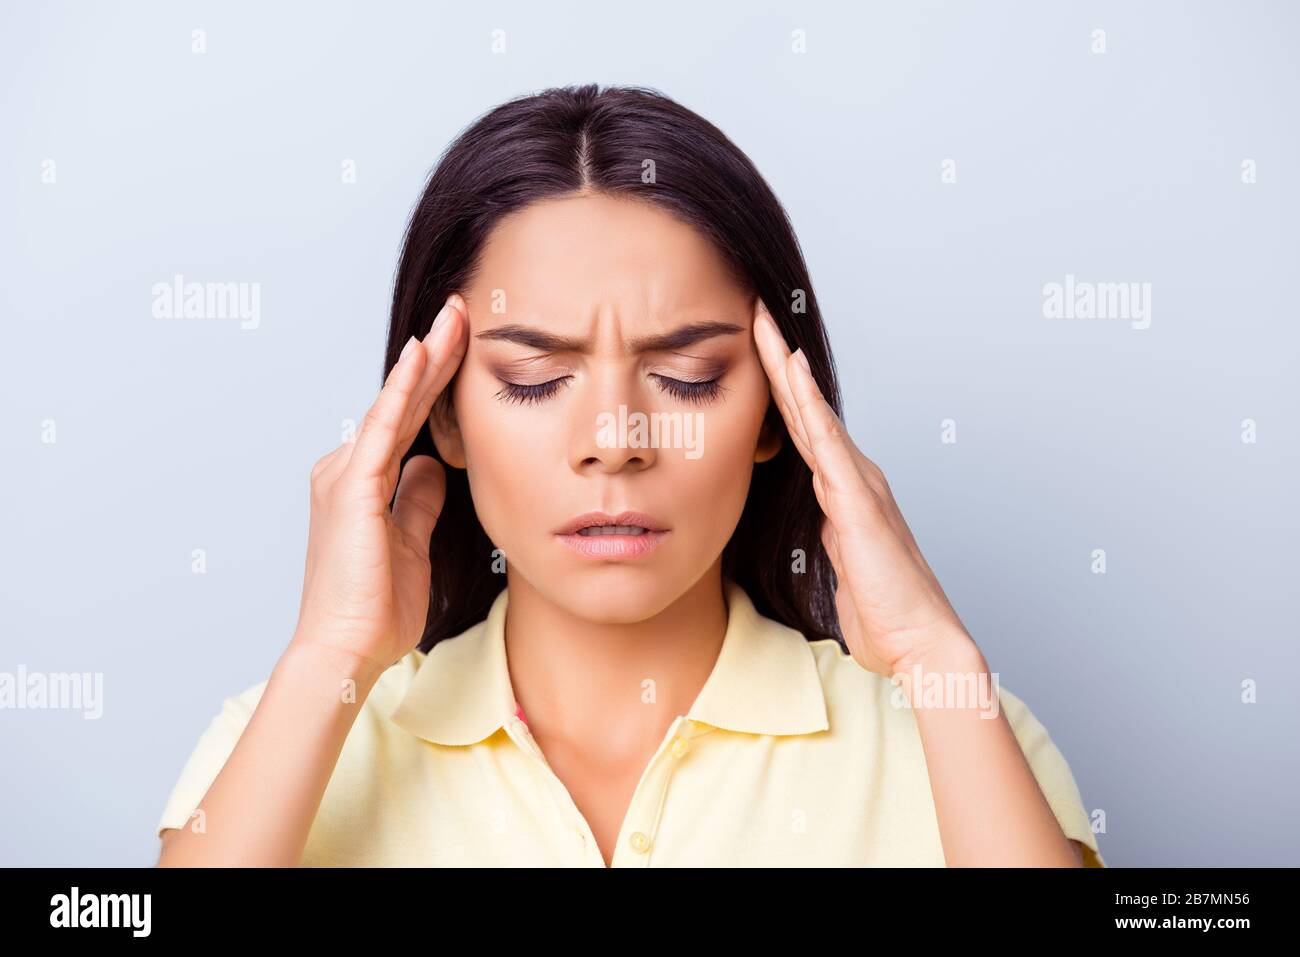 Close up portrait of a young pretty hispanic woman having headache after stressful workday and touching her temples Stock Photo